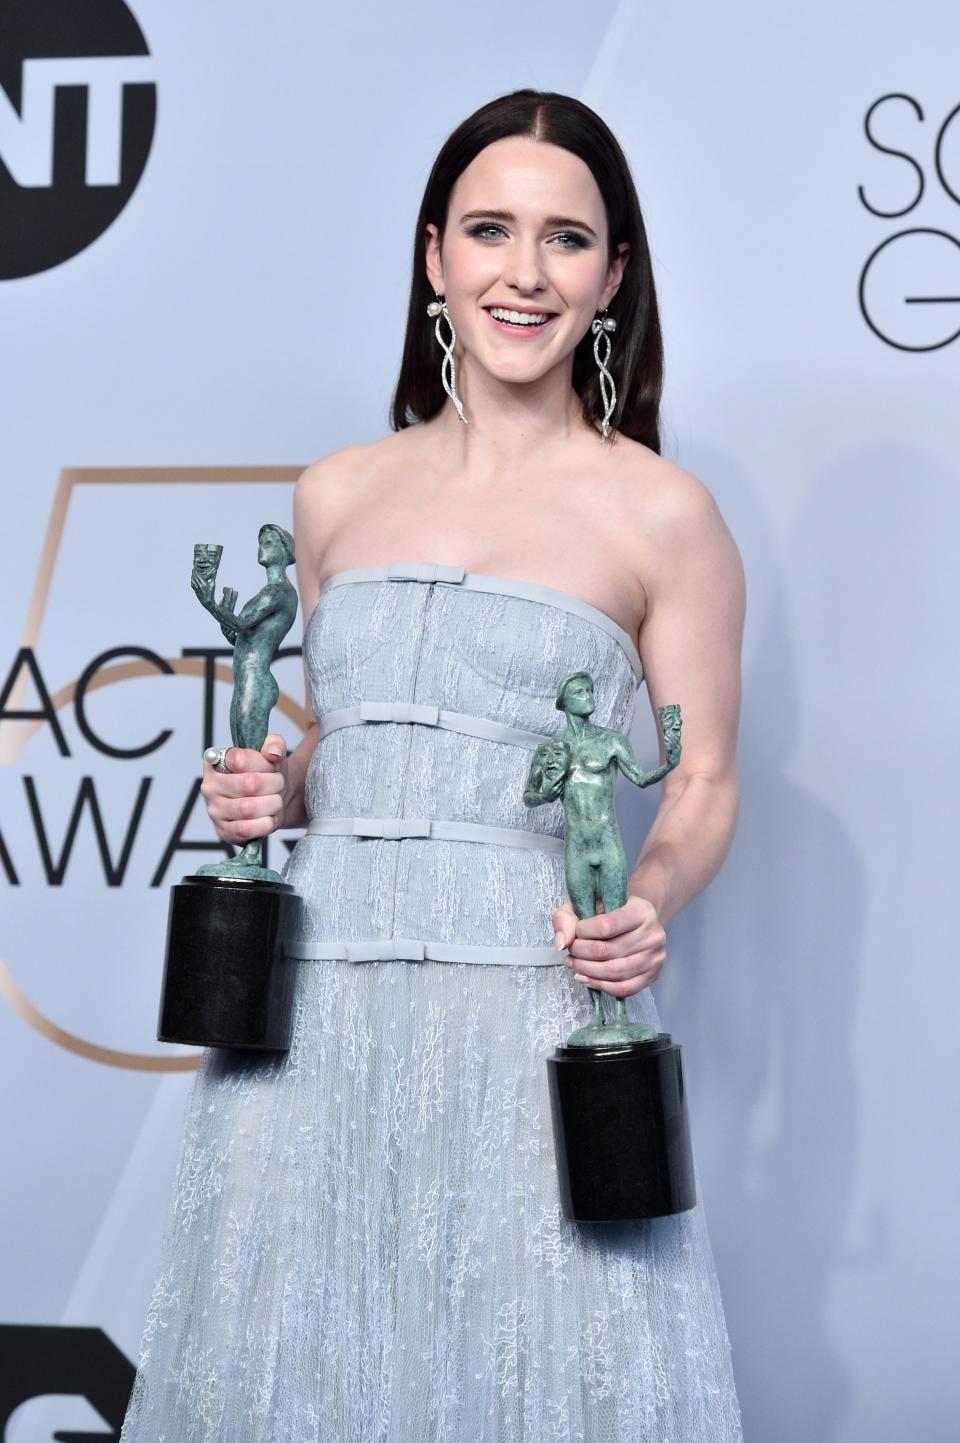 Brosnahan took home two statues (called “The Actor”) at the 2019 SAG Awards for her role in The Marvelous Mrs. Maisel.